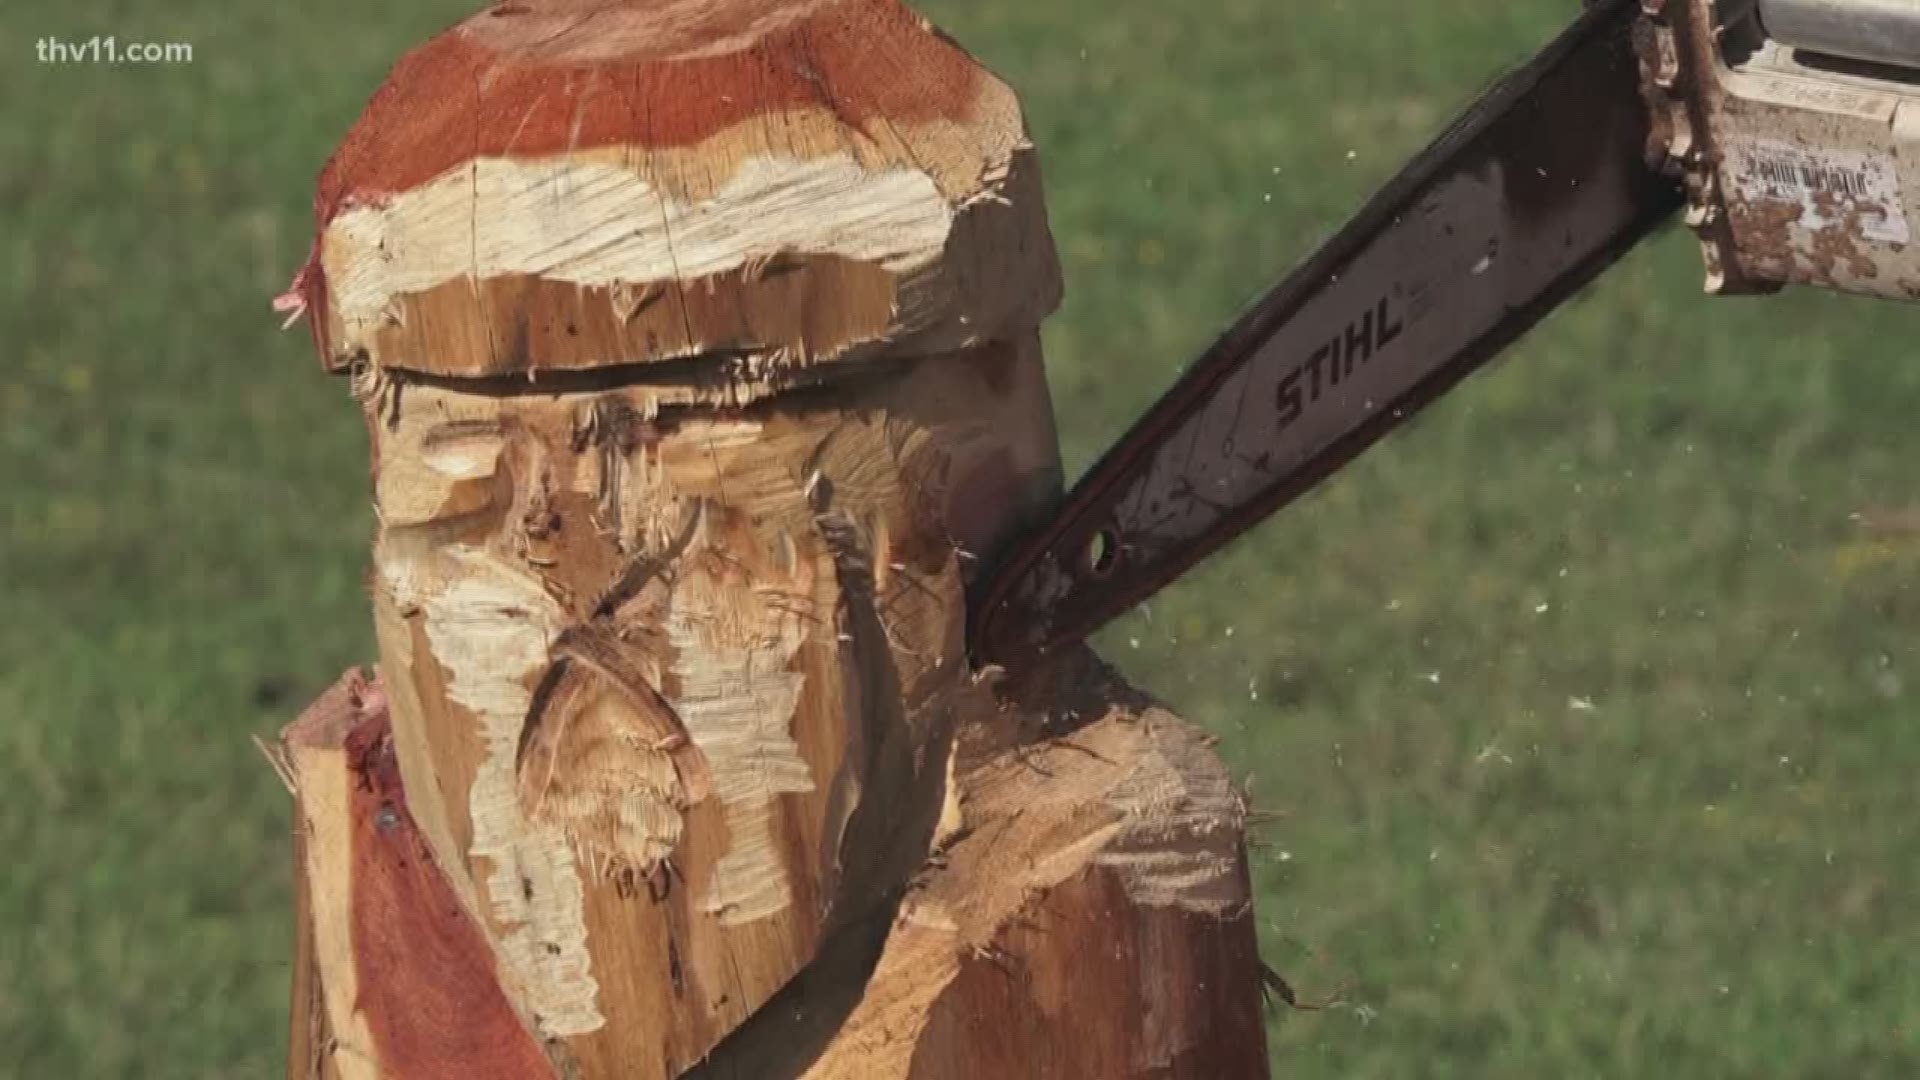 Lee Halbrook cuts designs into wood with a chainsaw. The designs are incredibly intricate.